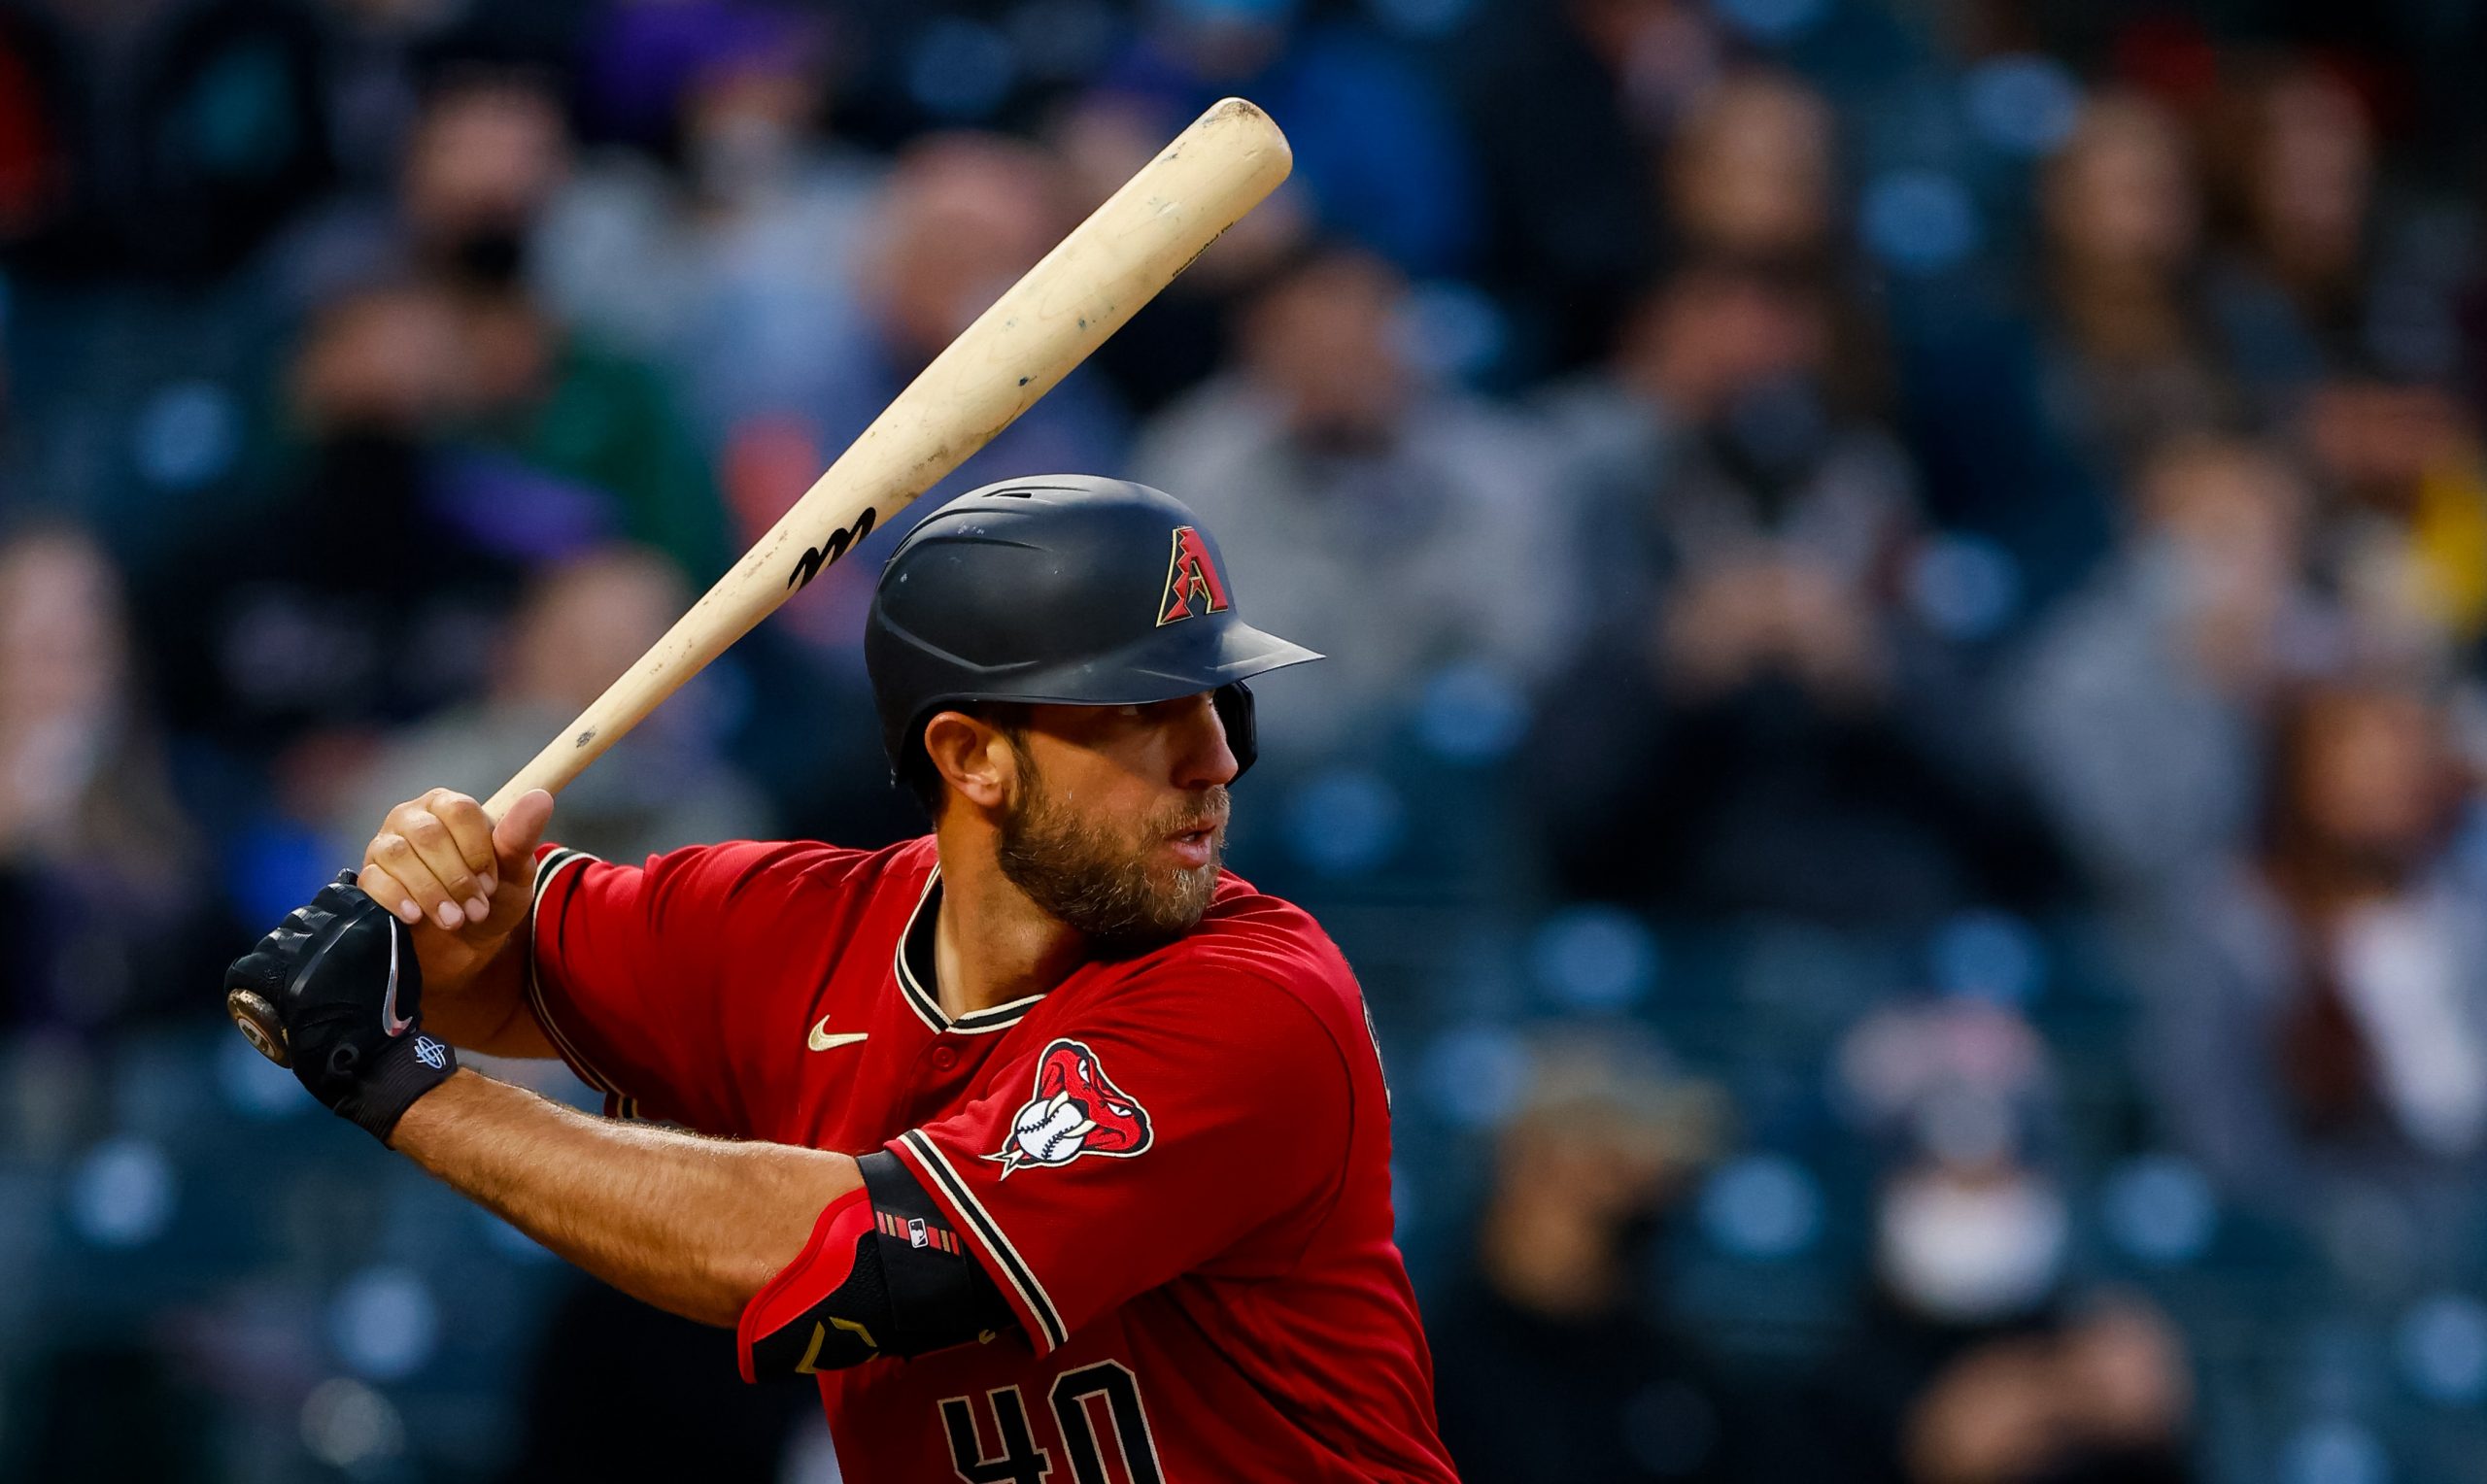 Madison Bumgarner pinch hits for D-backs in 9th inning of tie game